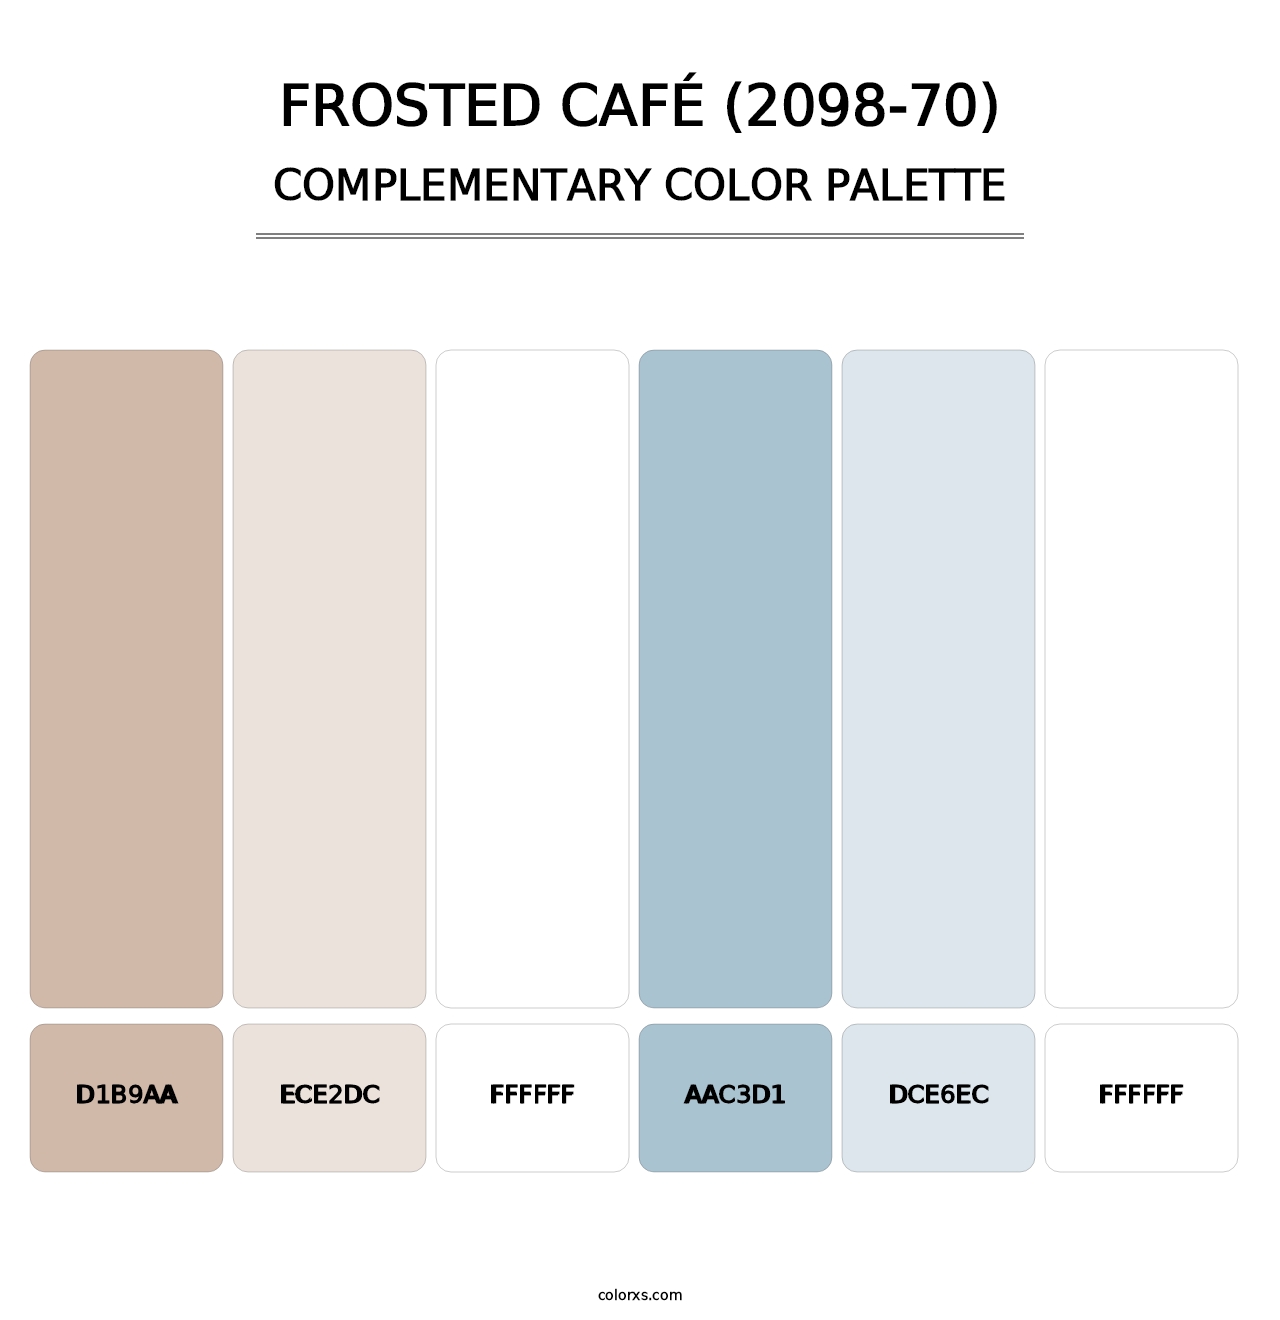 Frosted Café (2098-70) - Complementary Color Palette